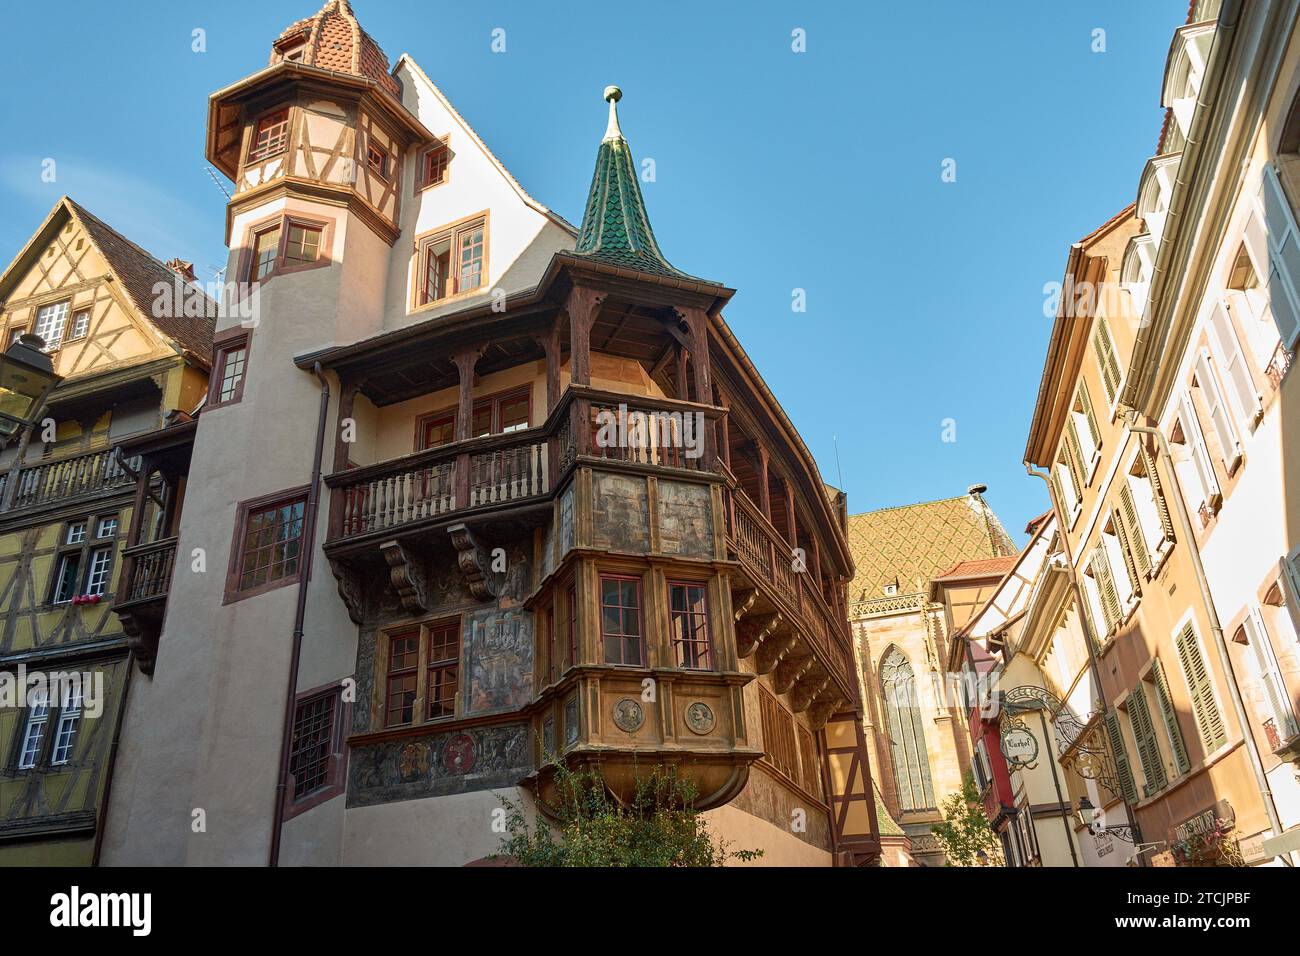 The Pfister House is a monument located in the municipality of Colmar (Haut-Rhin, Great East). Built in 1537, it is the first example of Renaissance a Stock Photo